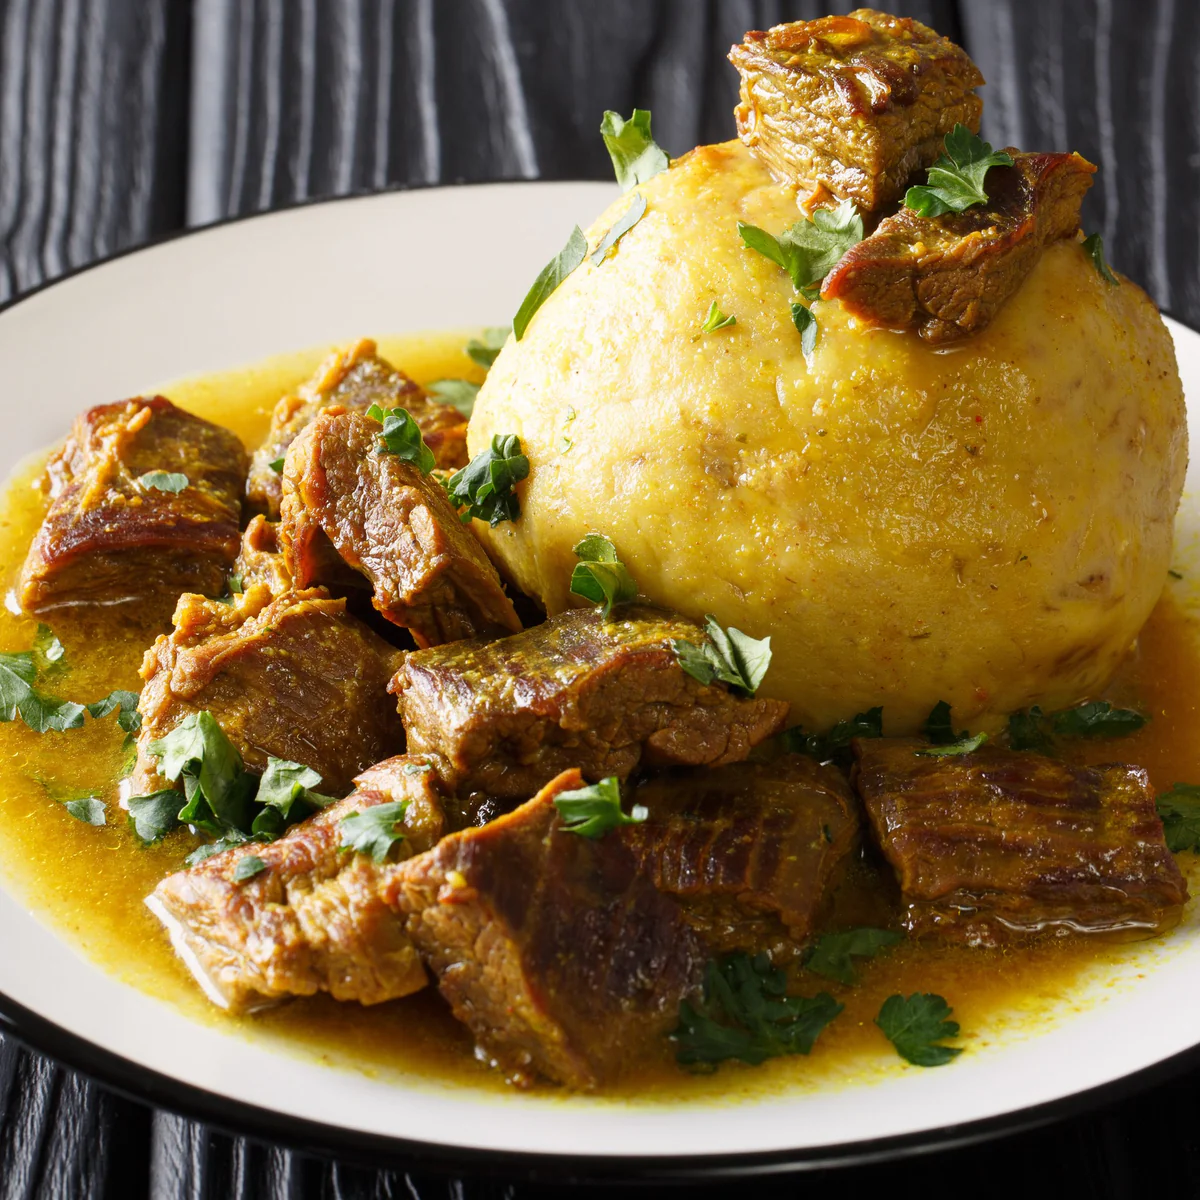 What to Serve with Mofongo Pernil (Roasted Pork Shoulder) with Mofongo